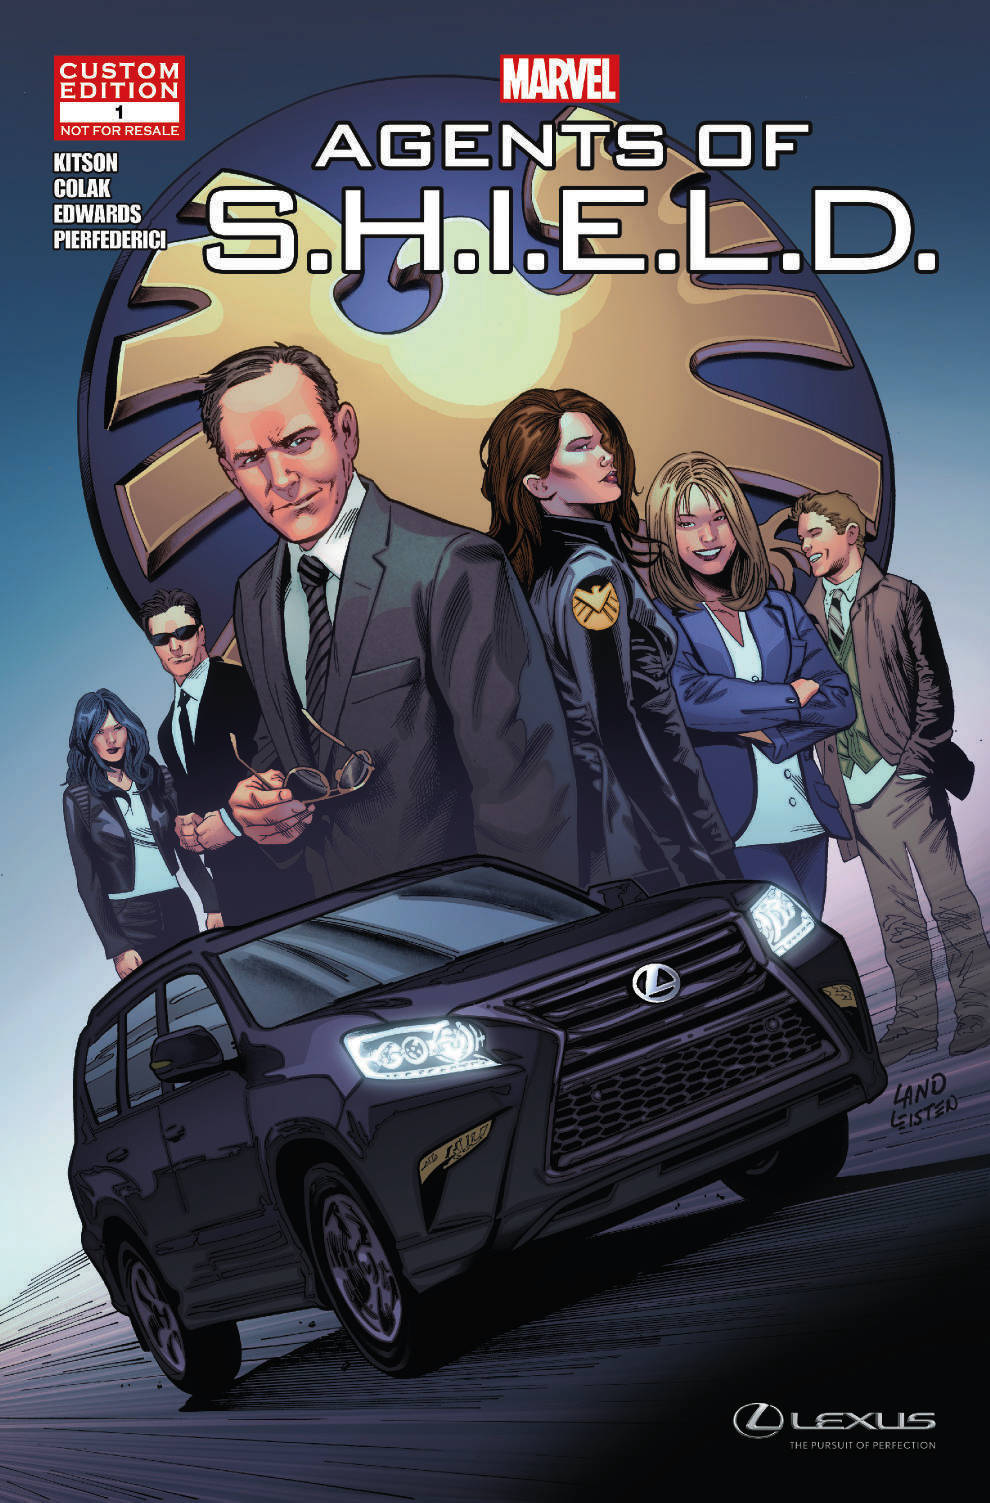 Lexus Presents: Marvel's Agents of S.H.I.E.L.D in THE CHASE (2014) #1